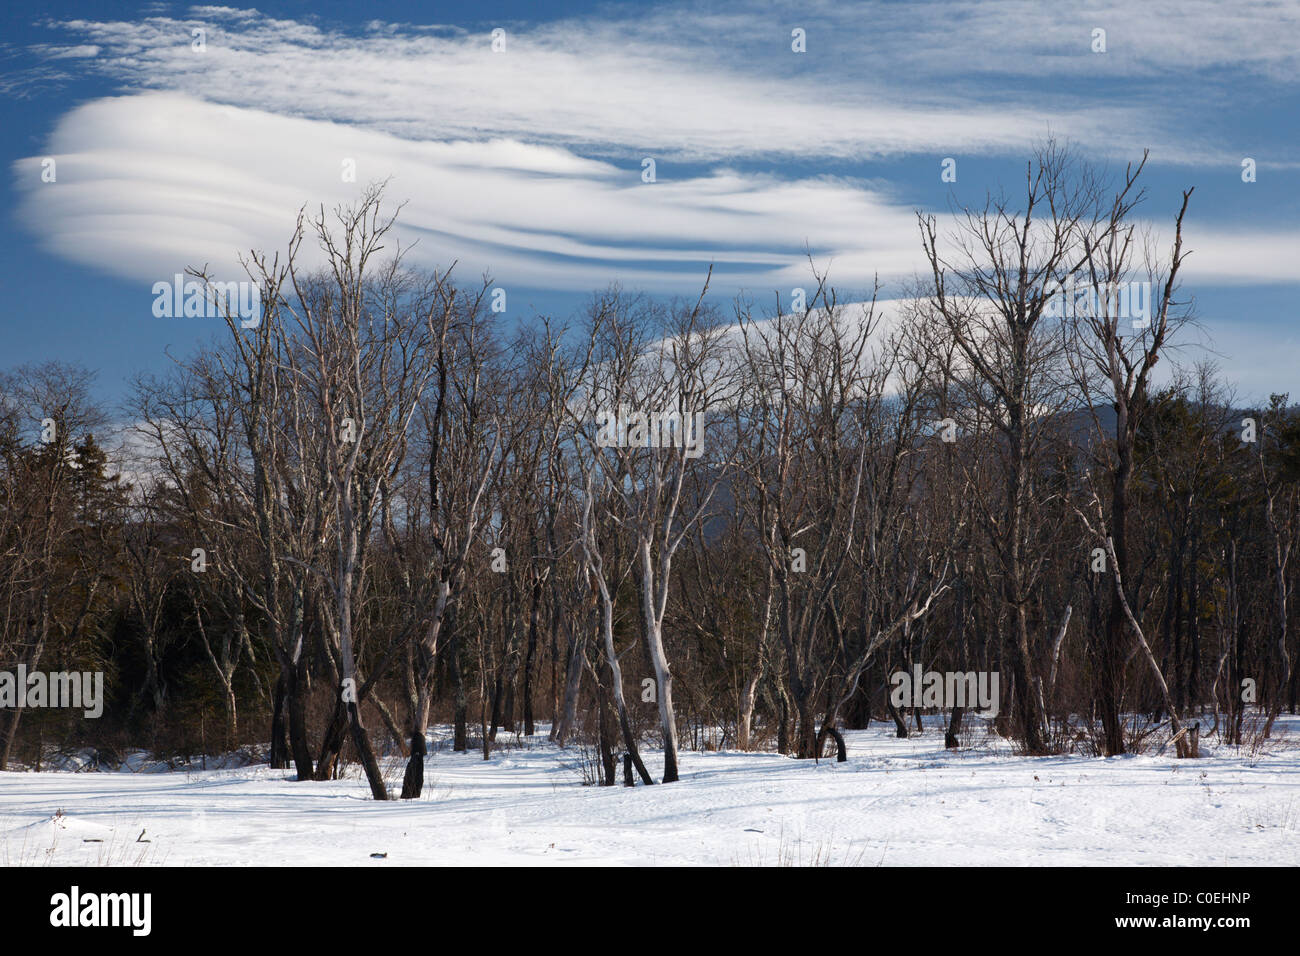 Altocumulus lenticularis clouds over forest along the Kancamagus Highway in the White Mountains, New Hampshire USA Stock Photo